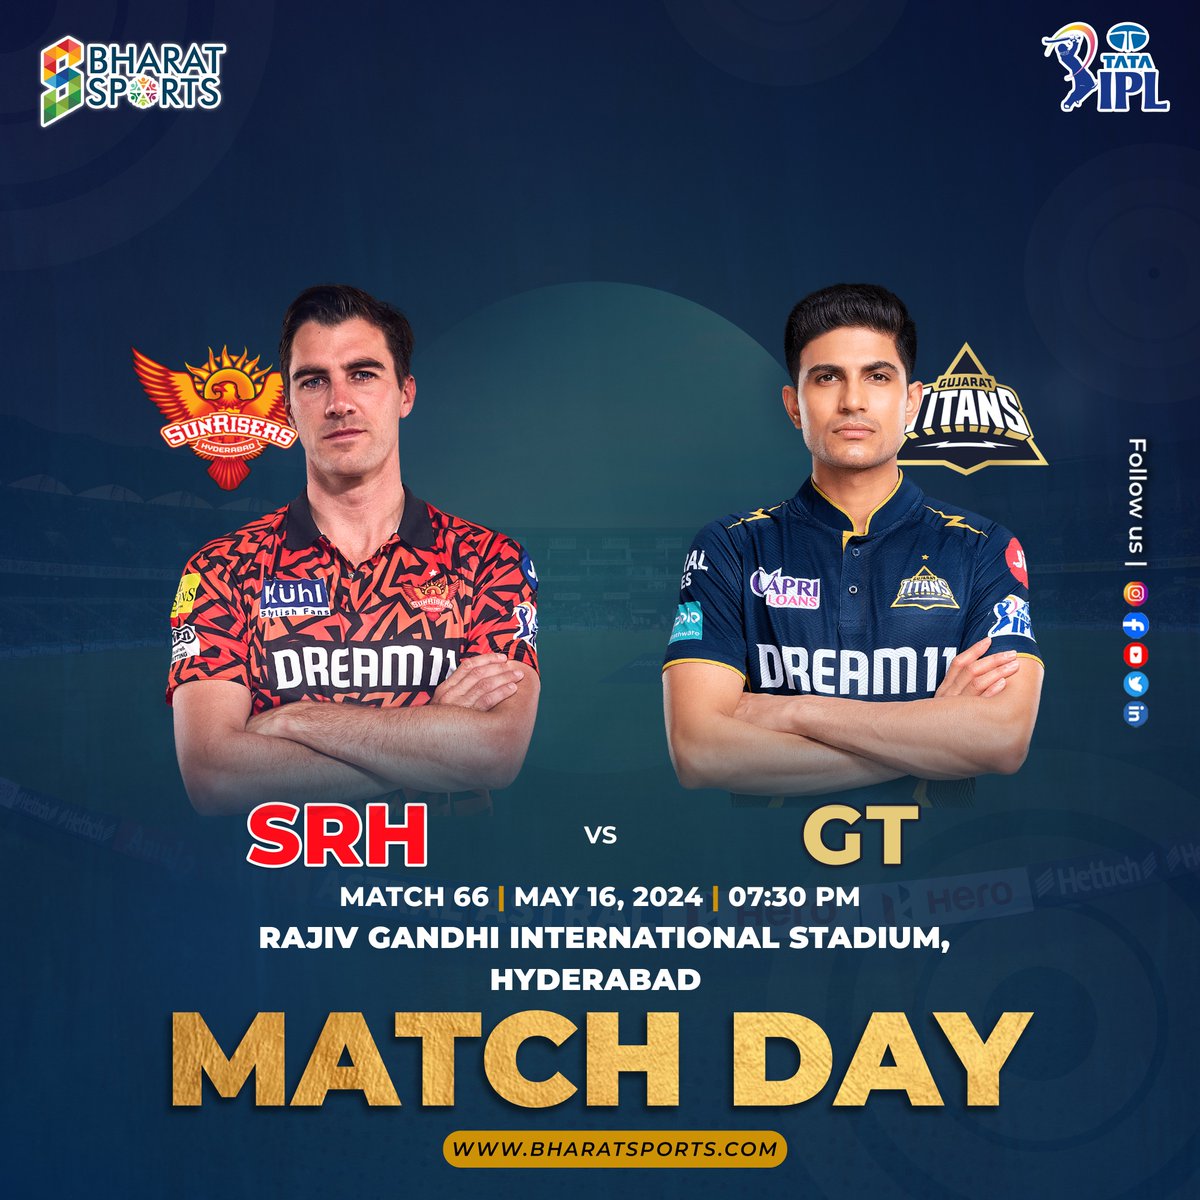 Get ready for an electrifying showdown at the Rajiv Gandhi International Stadium in Hyderabad! 🏟️🔥 It's Sunrisers Hyderabad 🏏💙🖤 vs. Gujarat Titans 🧡🔥 in a clash of titans! Who will emerge victorious in this thrilling contest? 💙🖤🔥🧡 #bcci #RajasthanRoyals #Hyderabad